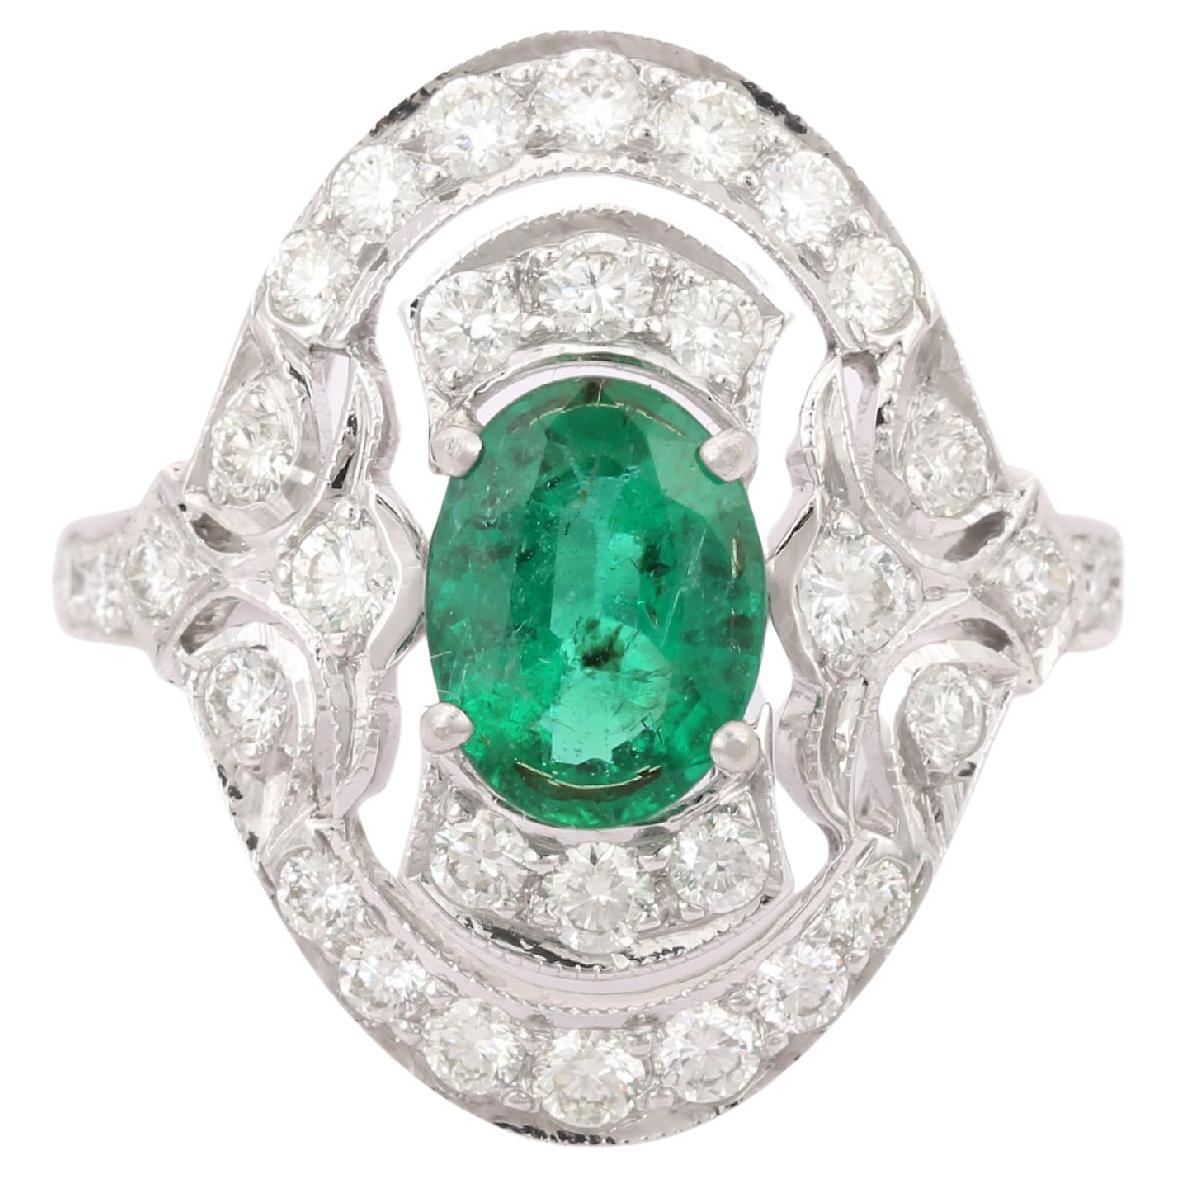 For Sale:  18kt Solid White Gold Art Deco Emerald Diamond Ring